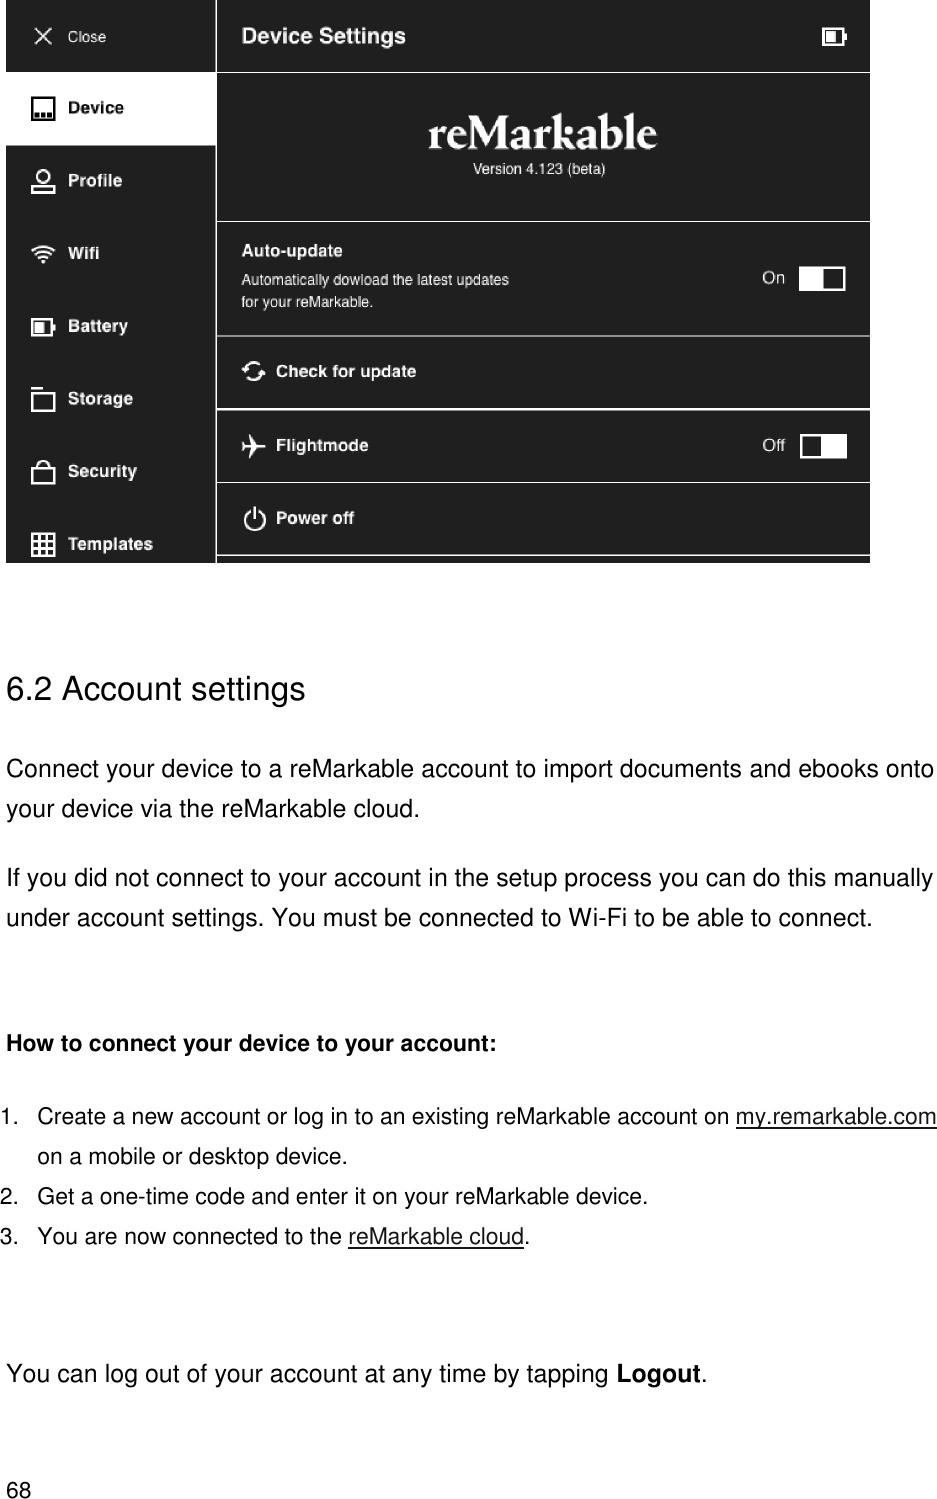 68    6.2 Account settings  Connect your device to a reMarkable account to import documents and ebooks onto your device via the reMarkable cloud. If you did not connect to your account in the setup process you can do this manually under account settings. You must be connected to Wi-Fi to be able to connect.   How to connect your device to your account: 1.  Create a new account or log in to an existing reMarkable account on my.remarkable.com on a mobile or desktop device. 2.  Get a one-time code and enter it on your reMarkable device. 3.  You are now connected to the reMarkable cloud.   You can log out of your account at any time by tapping Logout. 